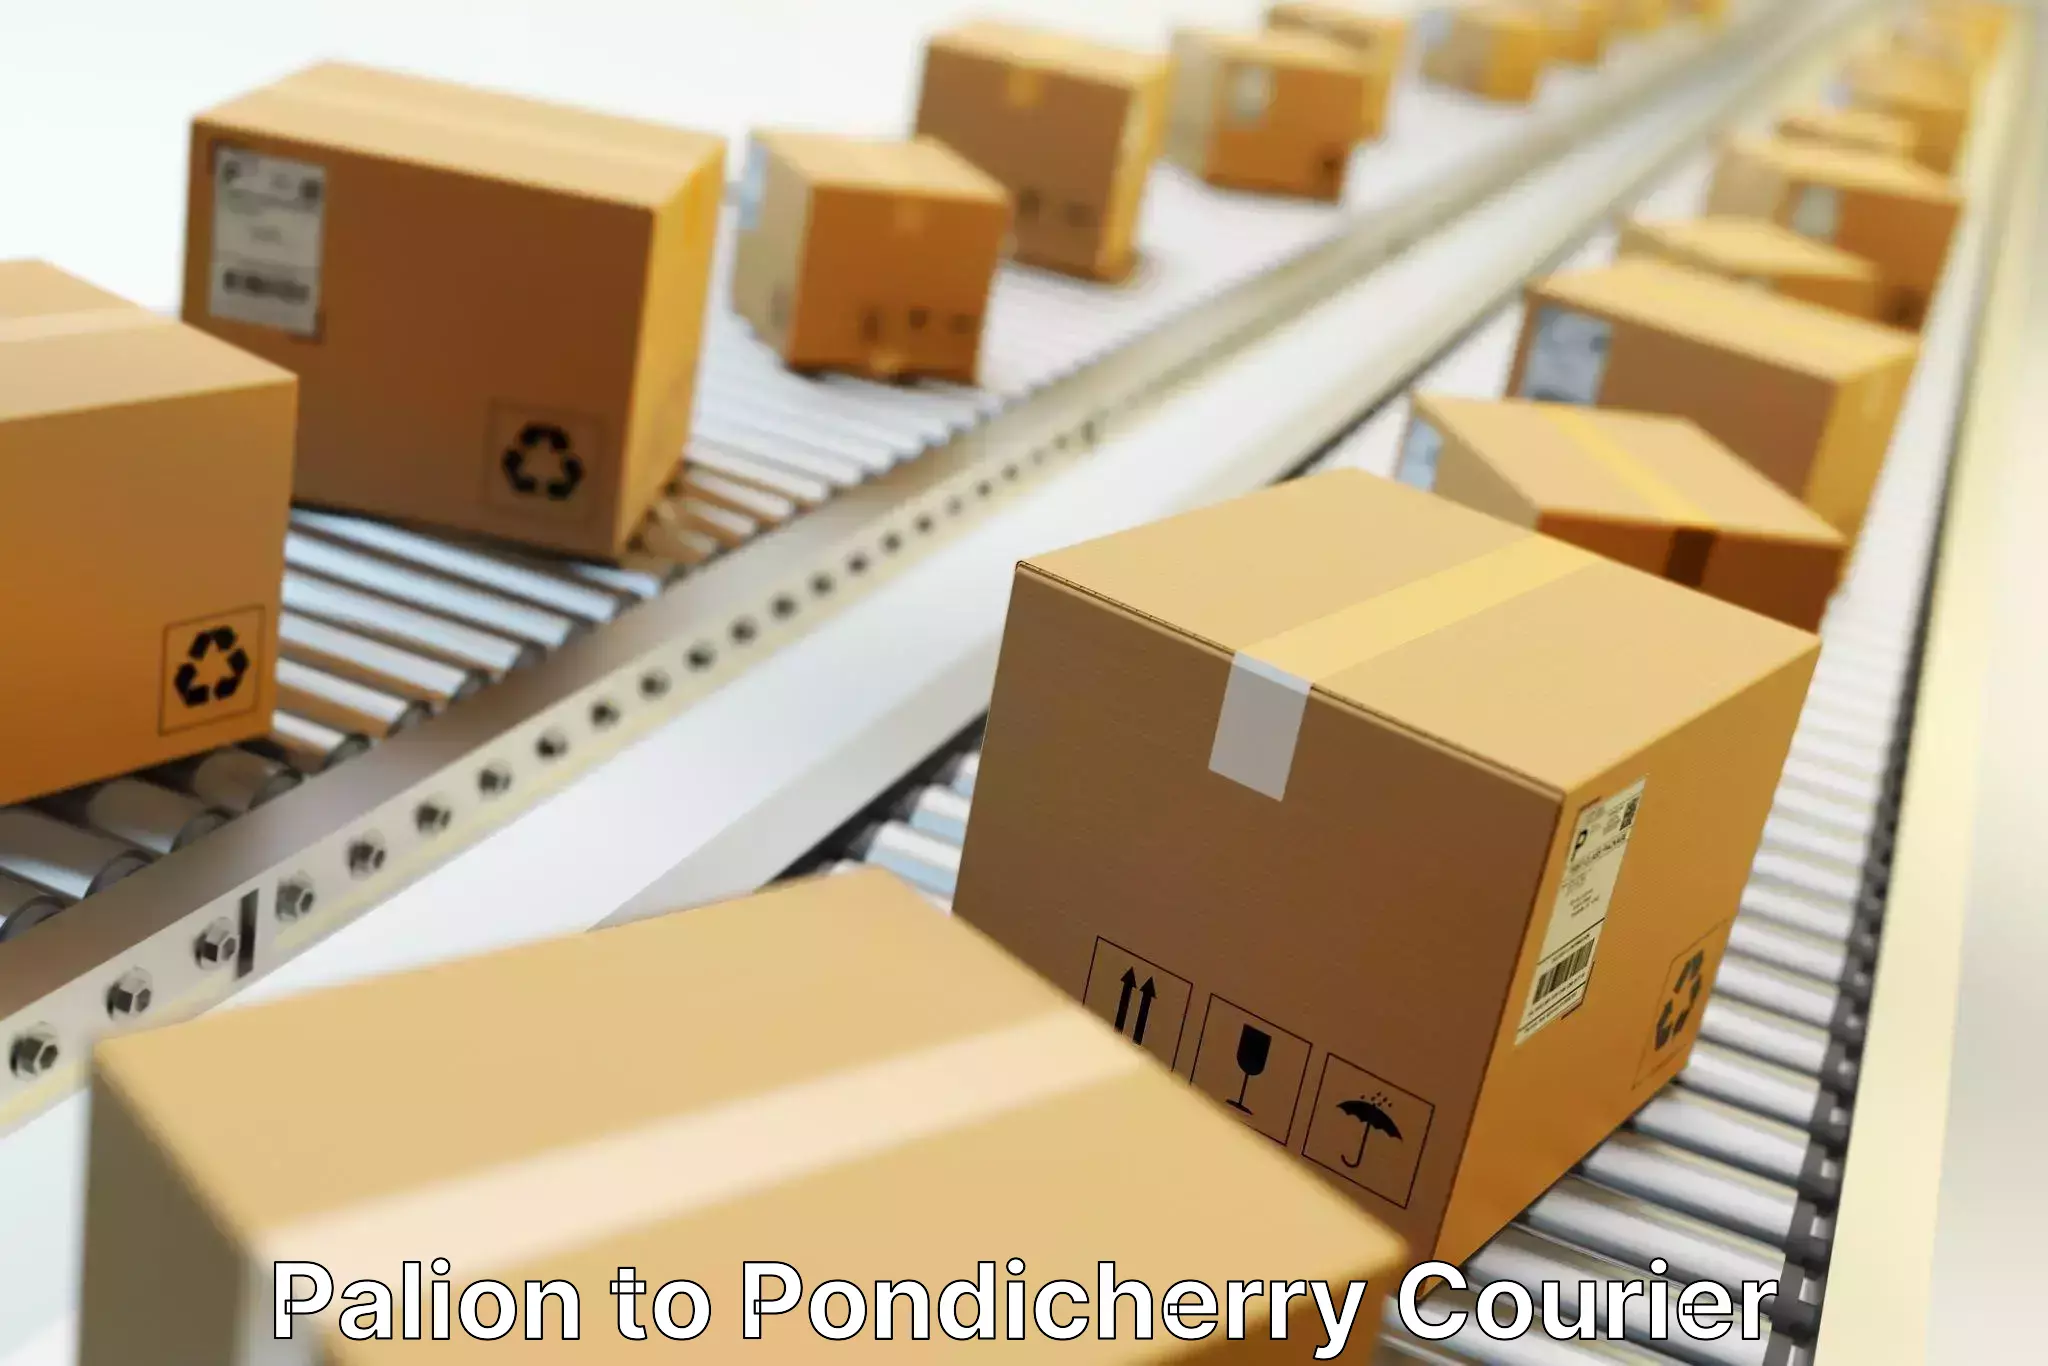 On-demand shipping options Palion to Pondicherry